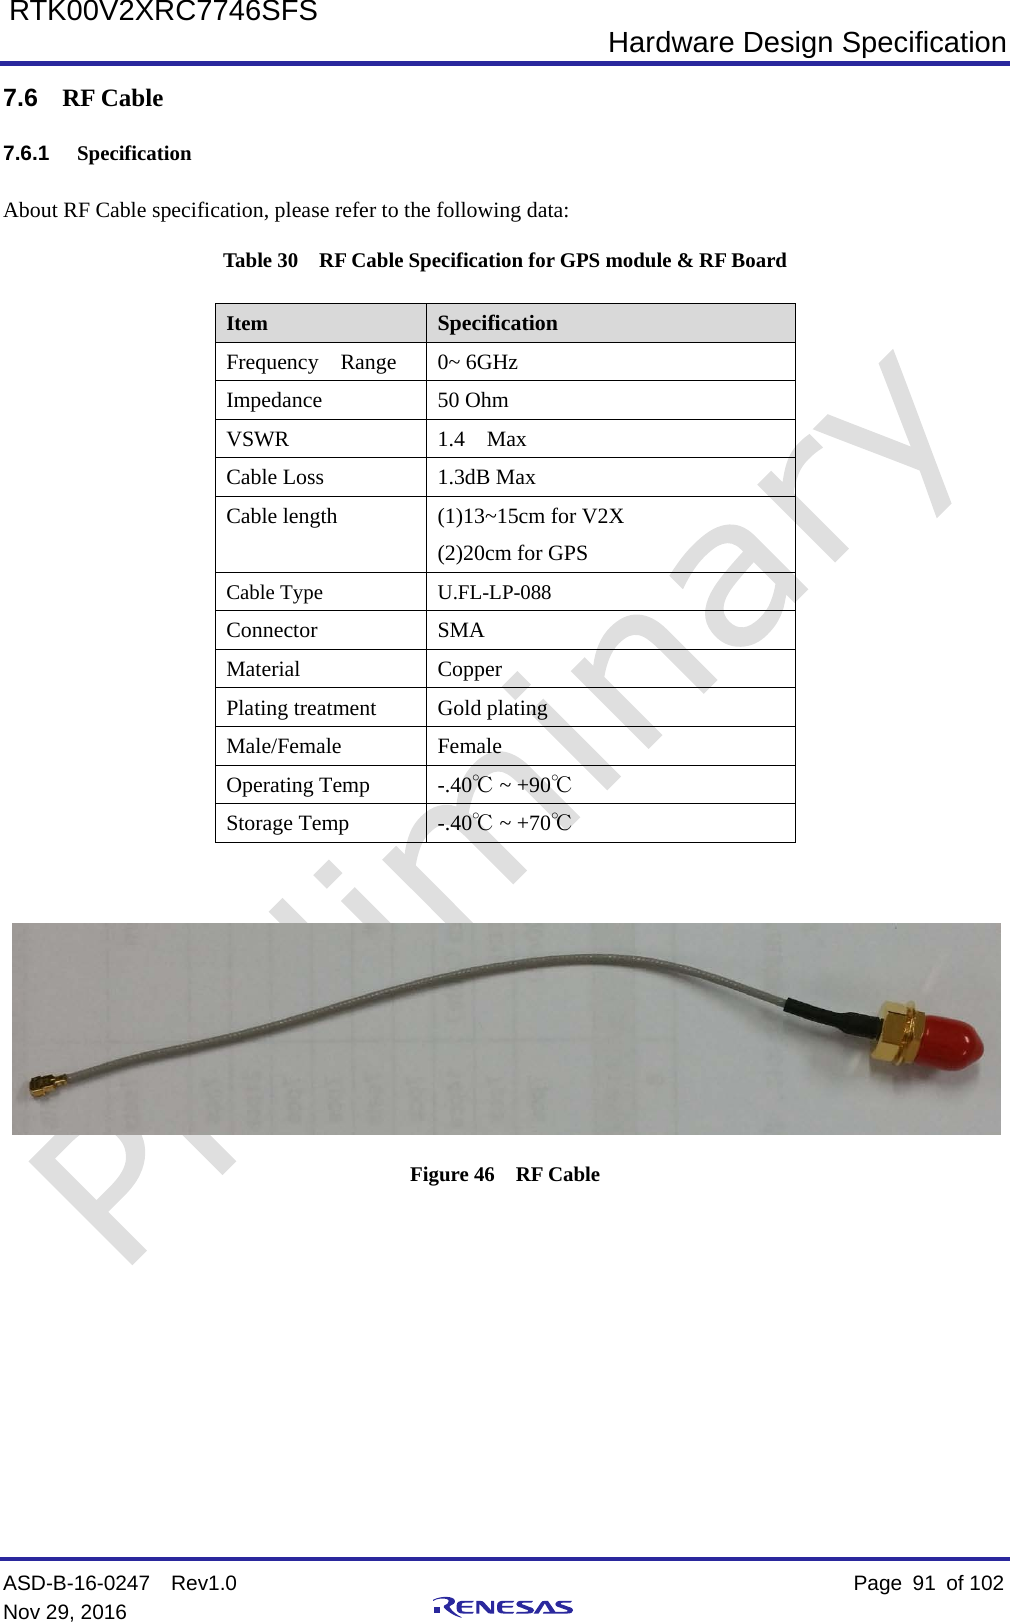  Hardware Design Specification ASD-B-16-0247  Rev1.0    Page  91 of 102 Nov 29, 2016     RTK00V2XRC7746SFS 7.6 RF Cable 7.6.1 Specification About RF Cable specification, please refer to the following data: Table 30  RF Cable Specification for GPS module &amp; RF Board Item Specification Frequency Range  0~ 6GHz Impedance 50 Ohm VSWR 1.4   Max Cable Loss 1.3dB Max Cable length (1)13~15cm for V2X (2)20cm for GPS Cable Type U.FL-LP-088 Connector SMA   Material Copper Plating treatment  Gold plating Male/Female Female Operating Temp -.40℃ ~ +90℃ Storage Temp -.40℃ ~ +70℃    Figure 46  RF Cable         